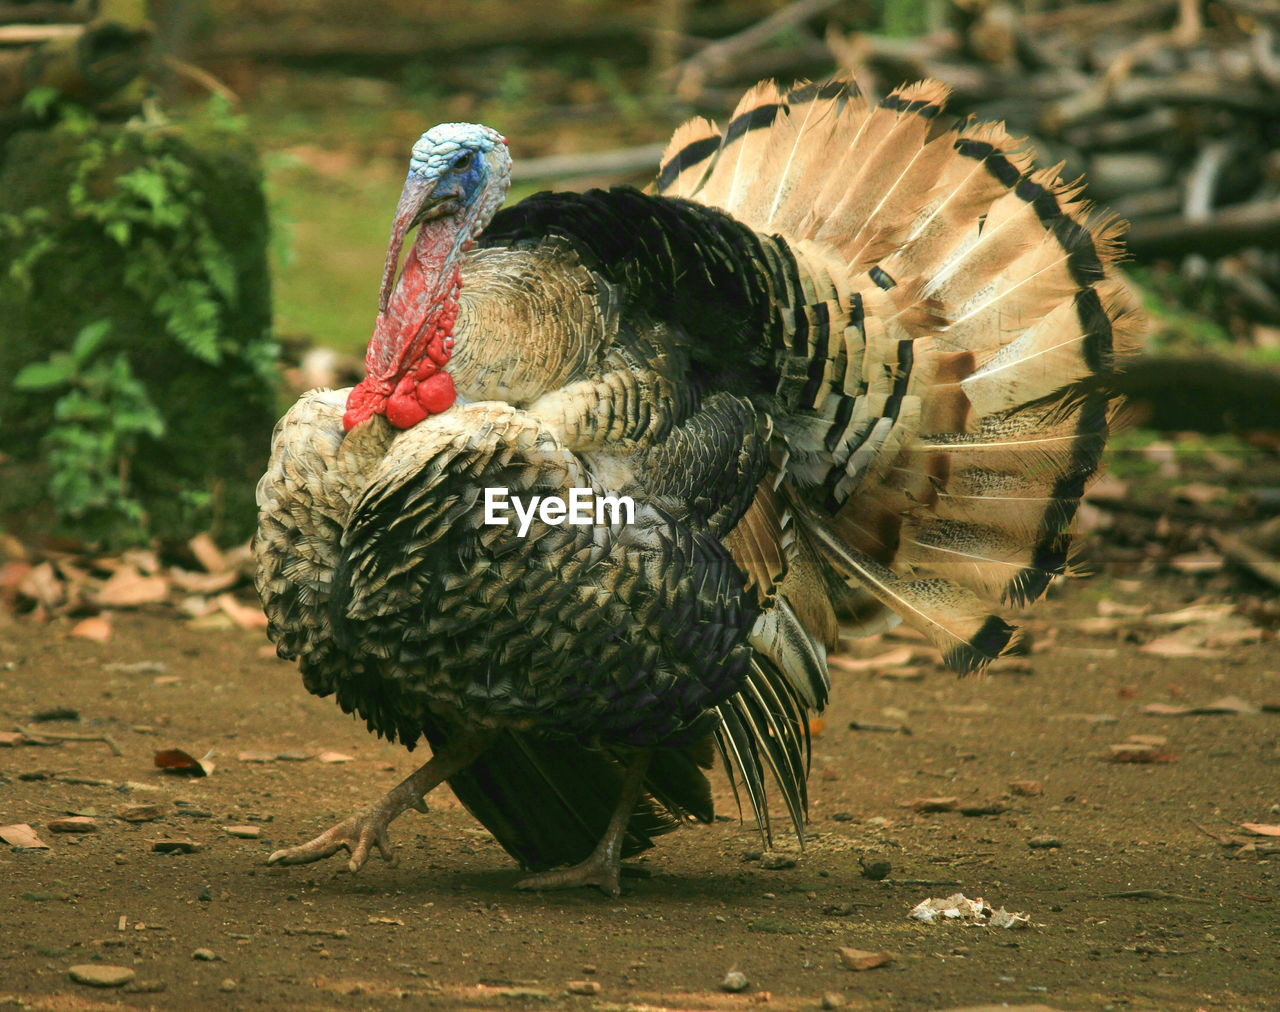 View of a bird on field turkey poultry animal